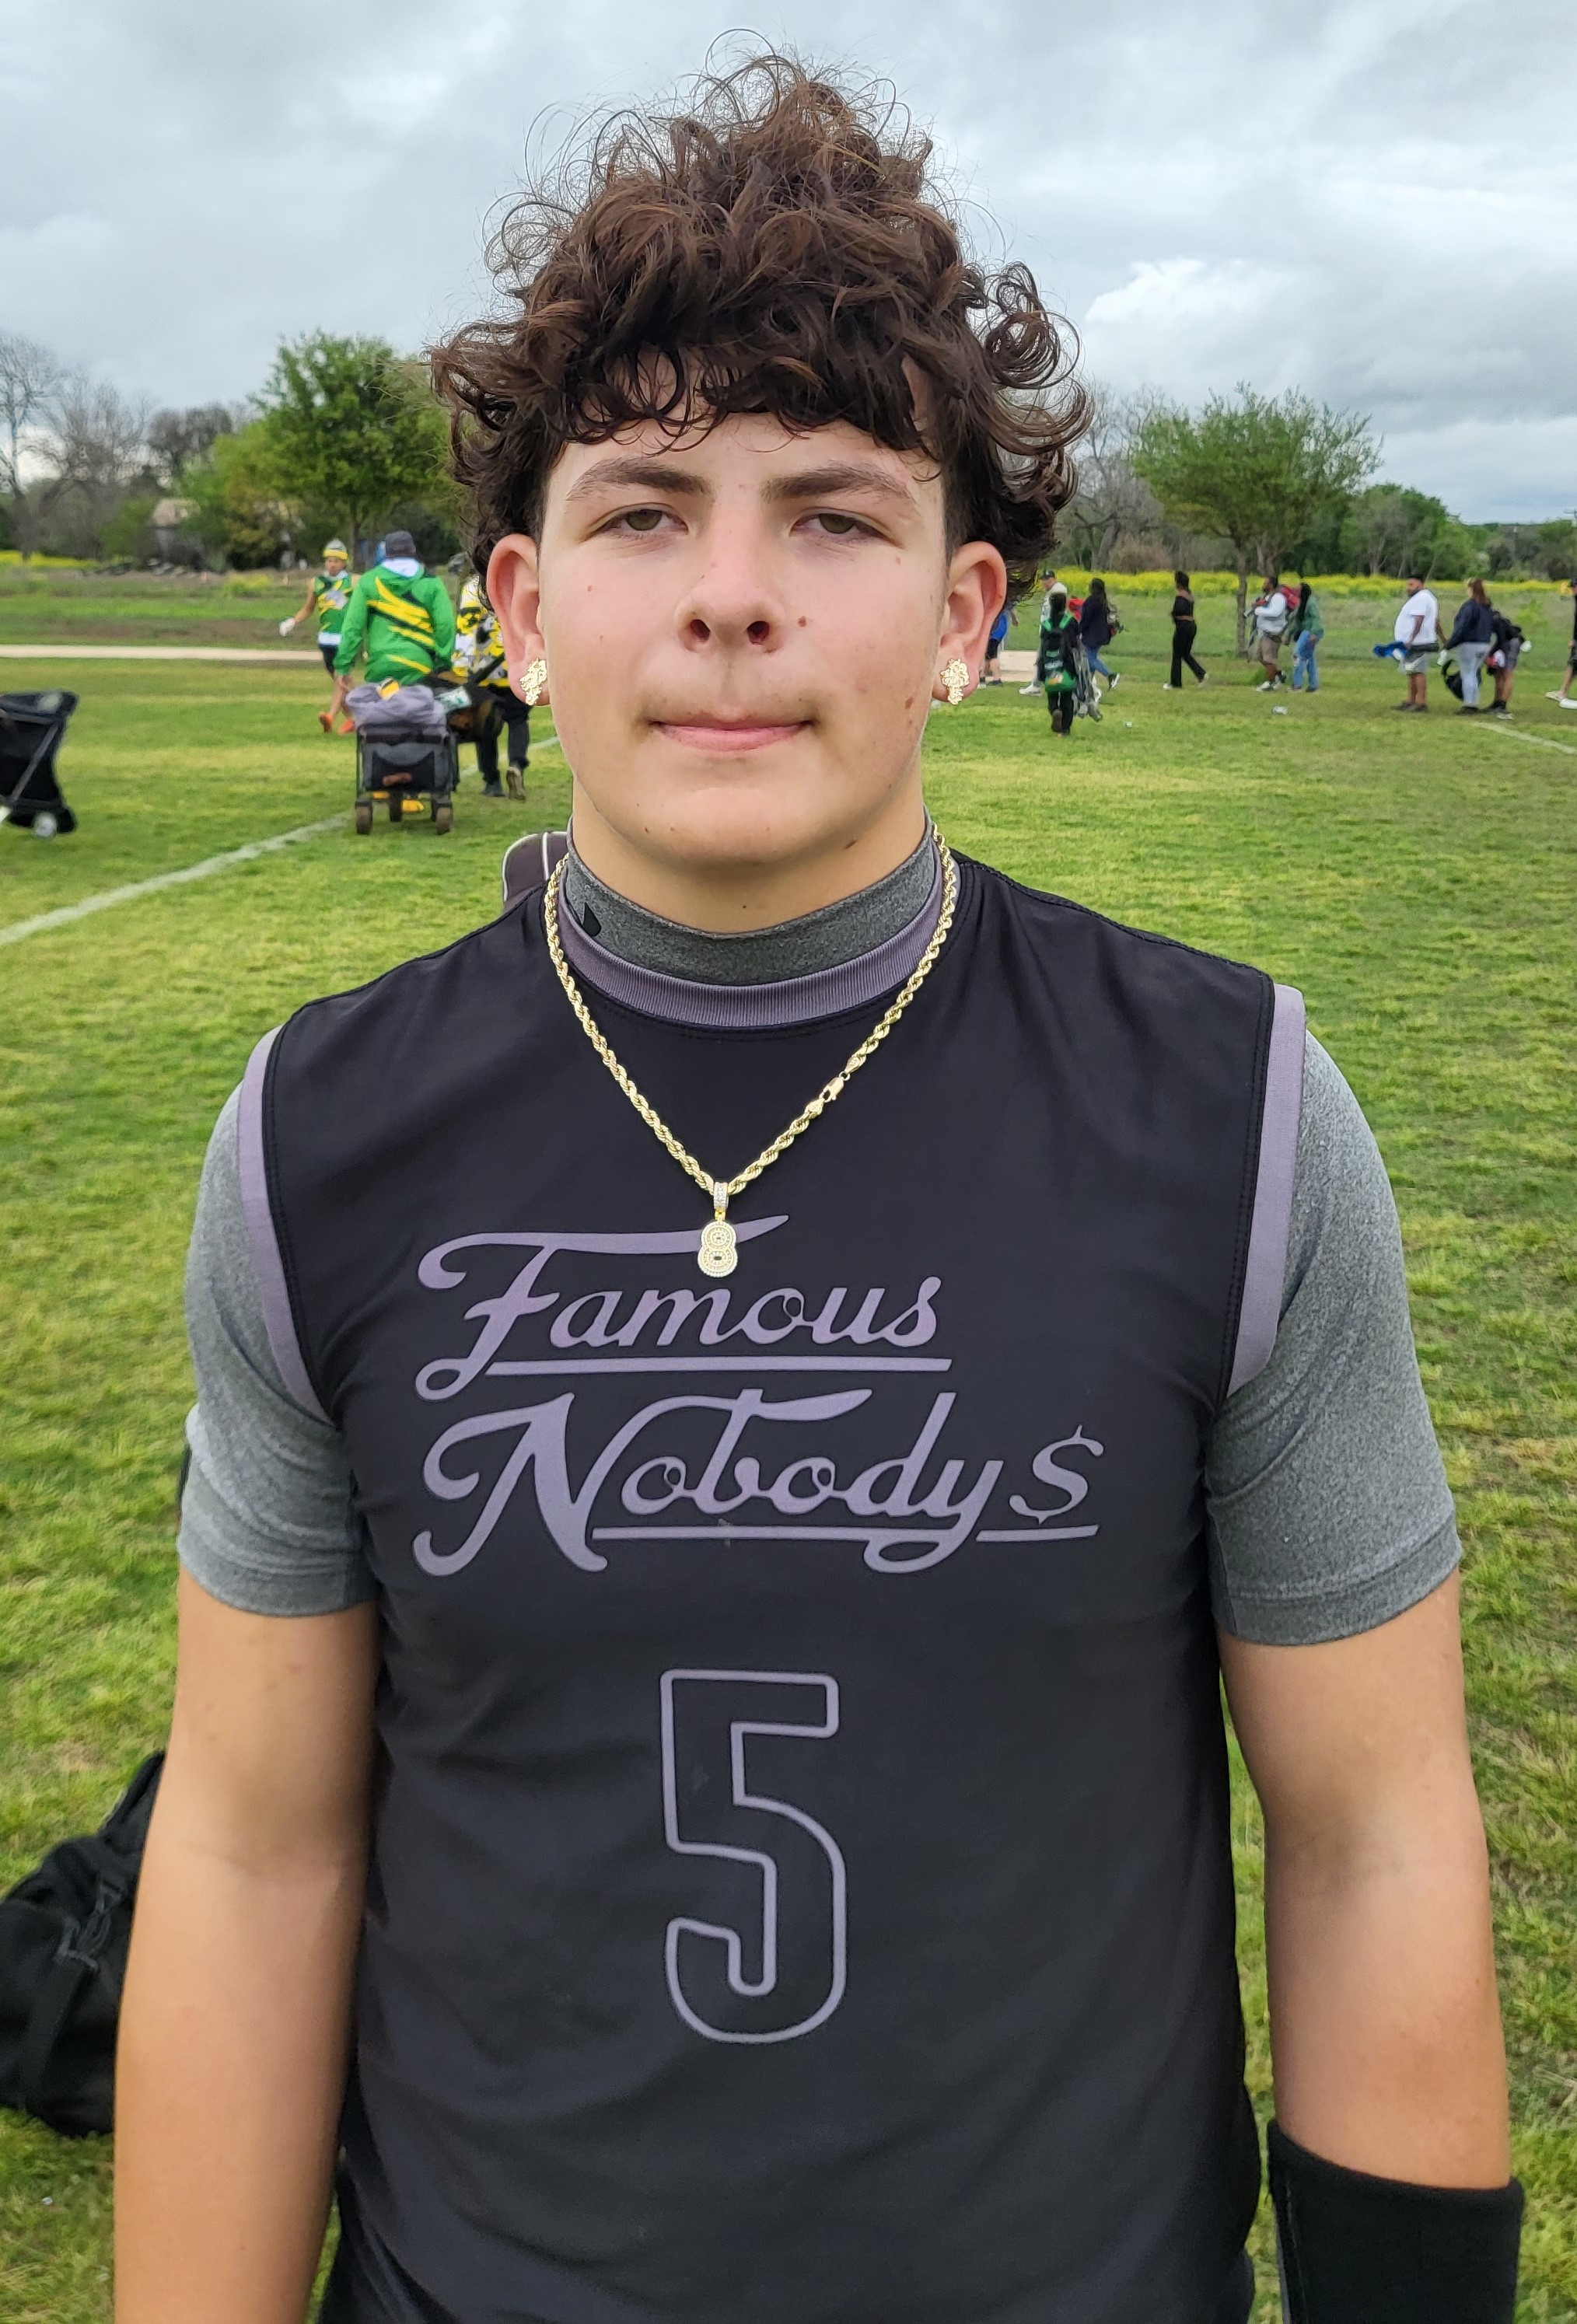 <span class="pn-tooltip pn-player-link">
        <span class="name-pointer">Tone Baby’s Spring Classic: QB Standouts Part 2</span>
        <span class="info-box not-prose" style="background: linear-gradient(to bottom, rgba(193,25,32, 0.95) 0%,rgba(193,25,32, 1) 100%)">
            <a href="https://prepredzone.com/2024/03/tone-babys-spring-classic-qb-standouts-part-2/" class="link-wrap">
                                    <span class="player-img"><img src="https://prepredzone.com/wp-content/uploads/sites/3/2024/03/eastonstone.jpg?w=150&h=150&crop=1" alt="Tone Baby’s Spring Classic: QB Standouts Part 2"></span>
                
                <span class="player-details">
                    <span class="first-name">Tone</span>
                    <span class="last-name">Baby’s Spring Classic: QB Standouts Part 2</span>
                    <span class="measurables">
                                            </span>
                                    </span>
                <span class="player-rank">
                                                        </span>
                                    <span class="state-abbr"></span>
                            </a>

            
        </span>
    </span>
